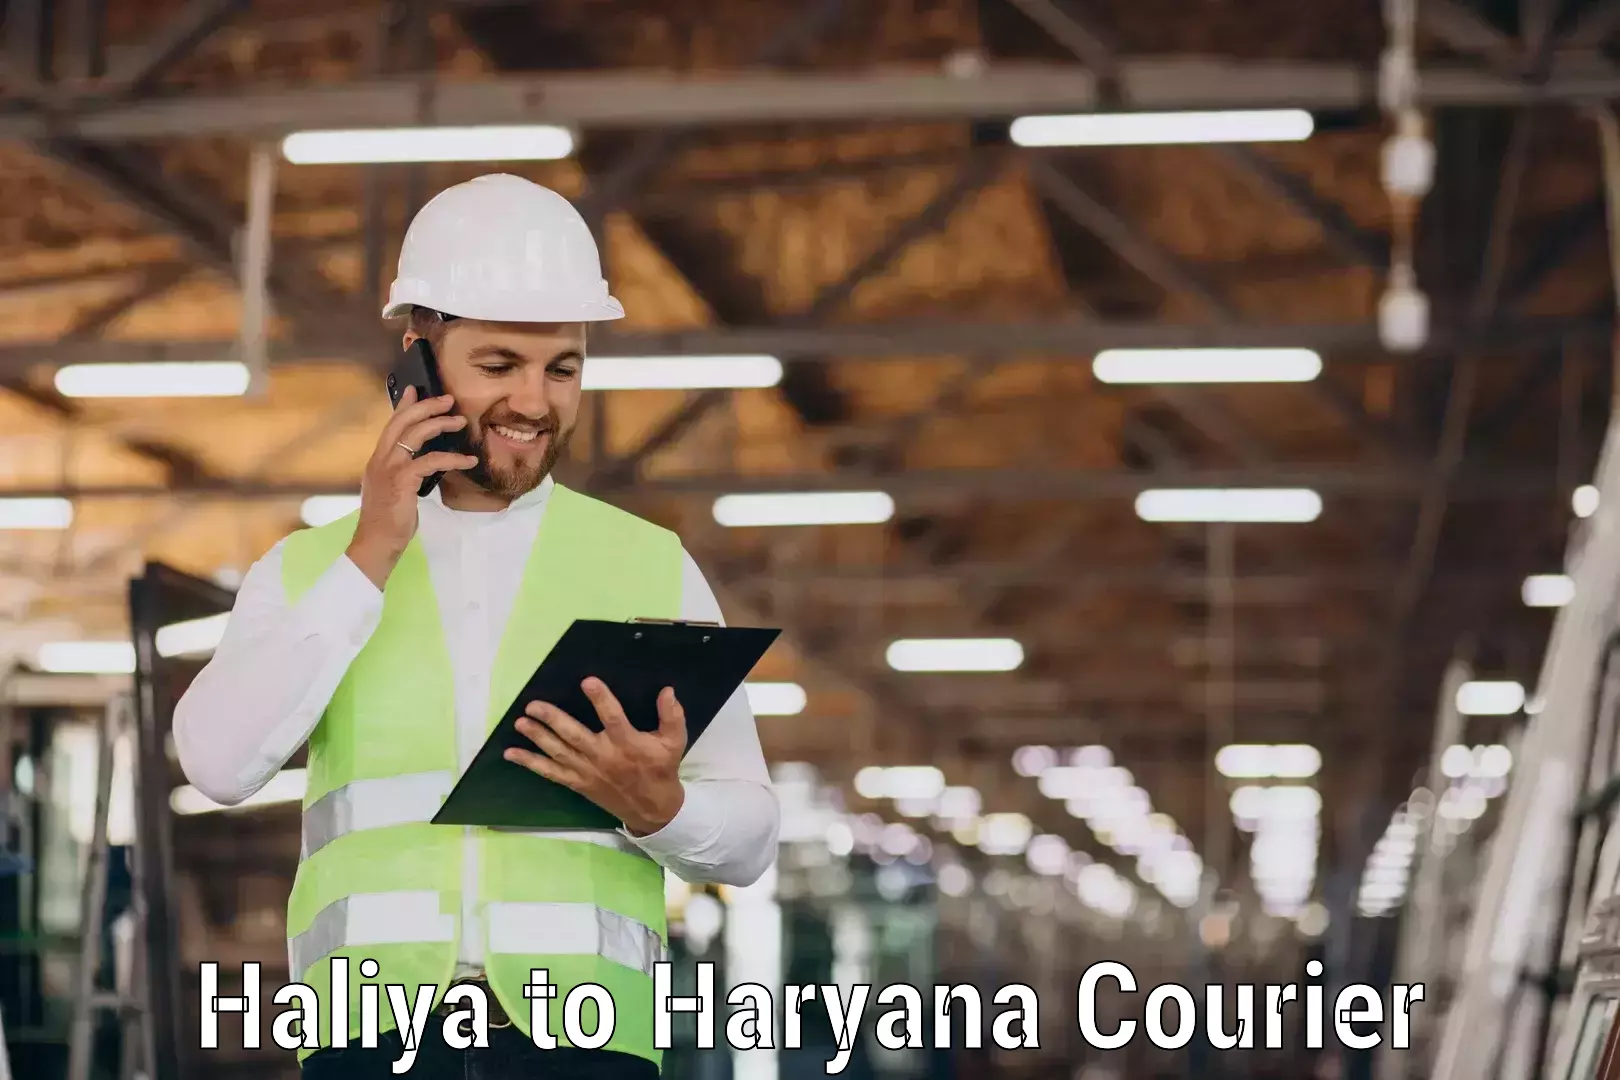 State-of-the-art courier technology Haliya to Haryana